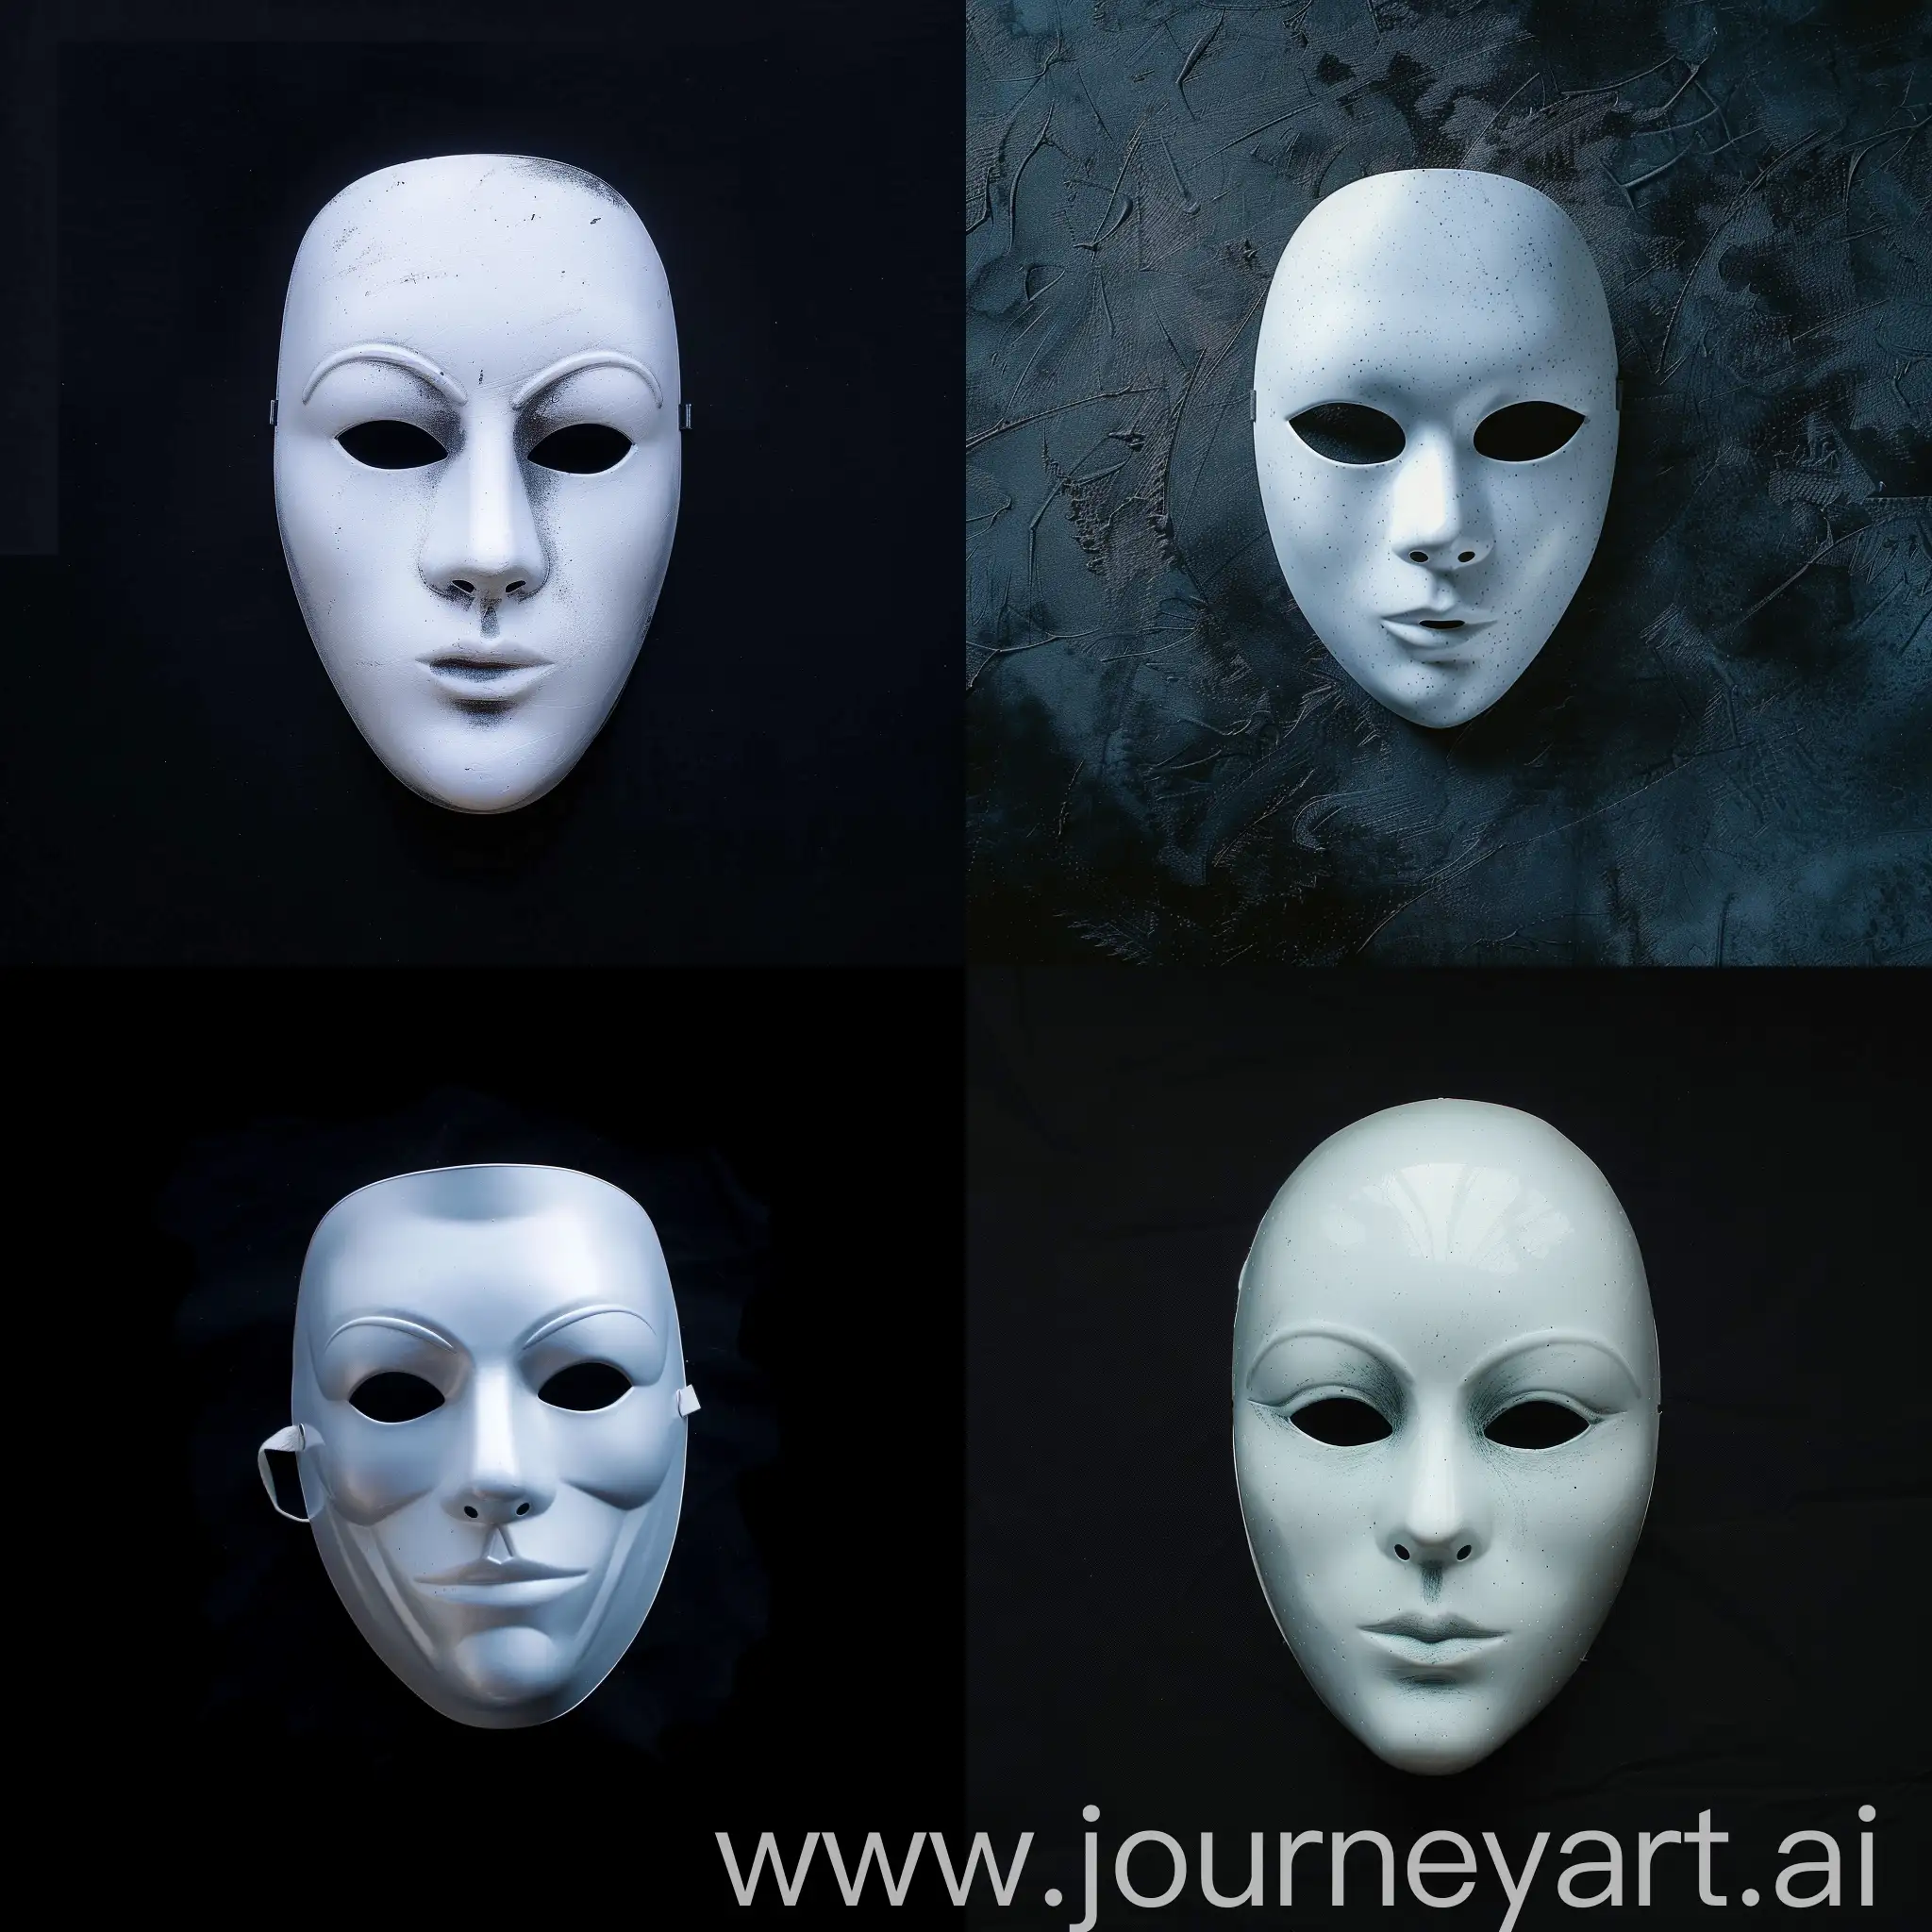 Mysterious-White-Mask-on-Black-Background-Depicting-Secretive-and-Illicit-Activity